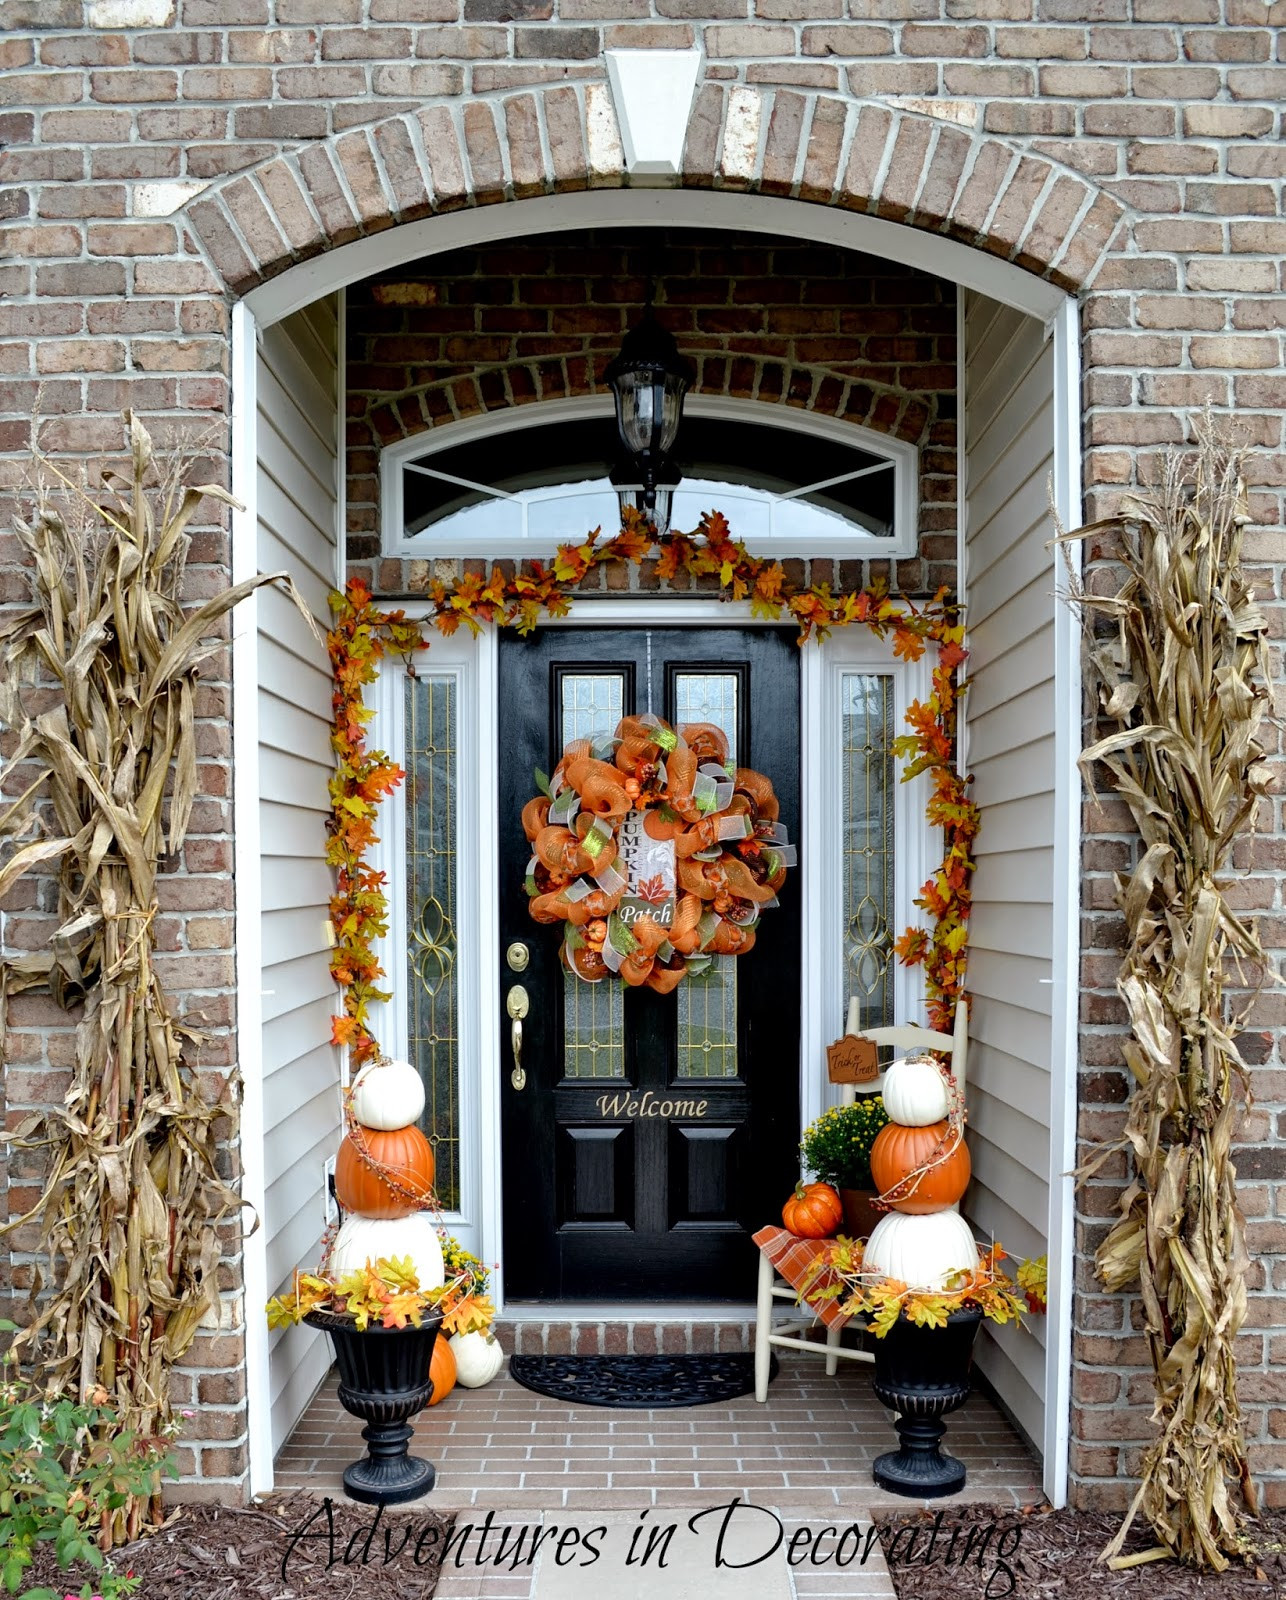 Fall Decor For Front Porch
 Adventures in Decorating Our Fall Front Porch